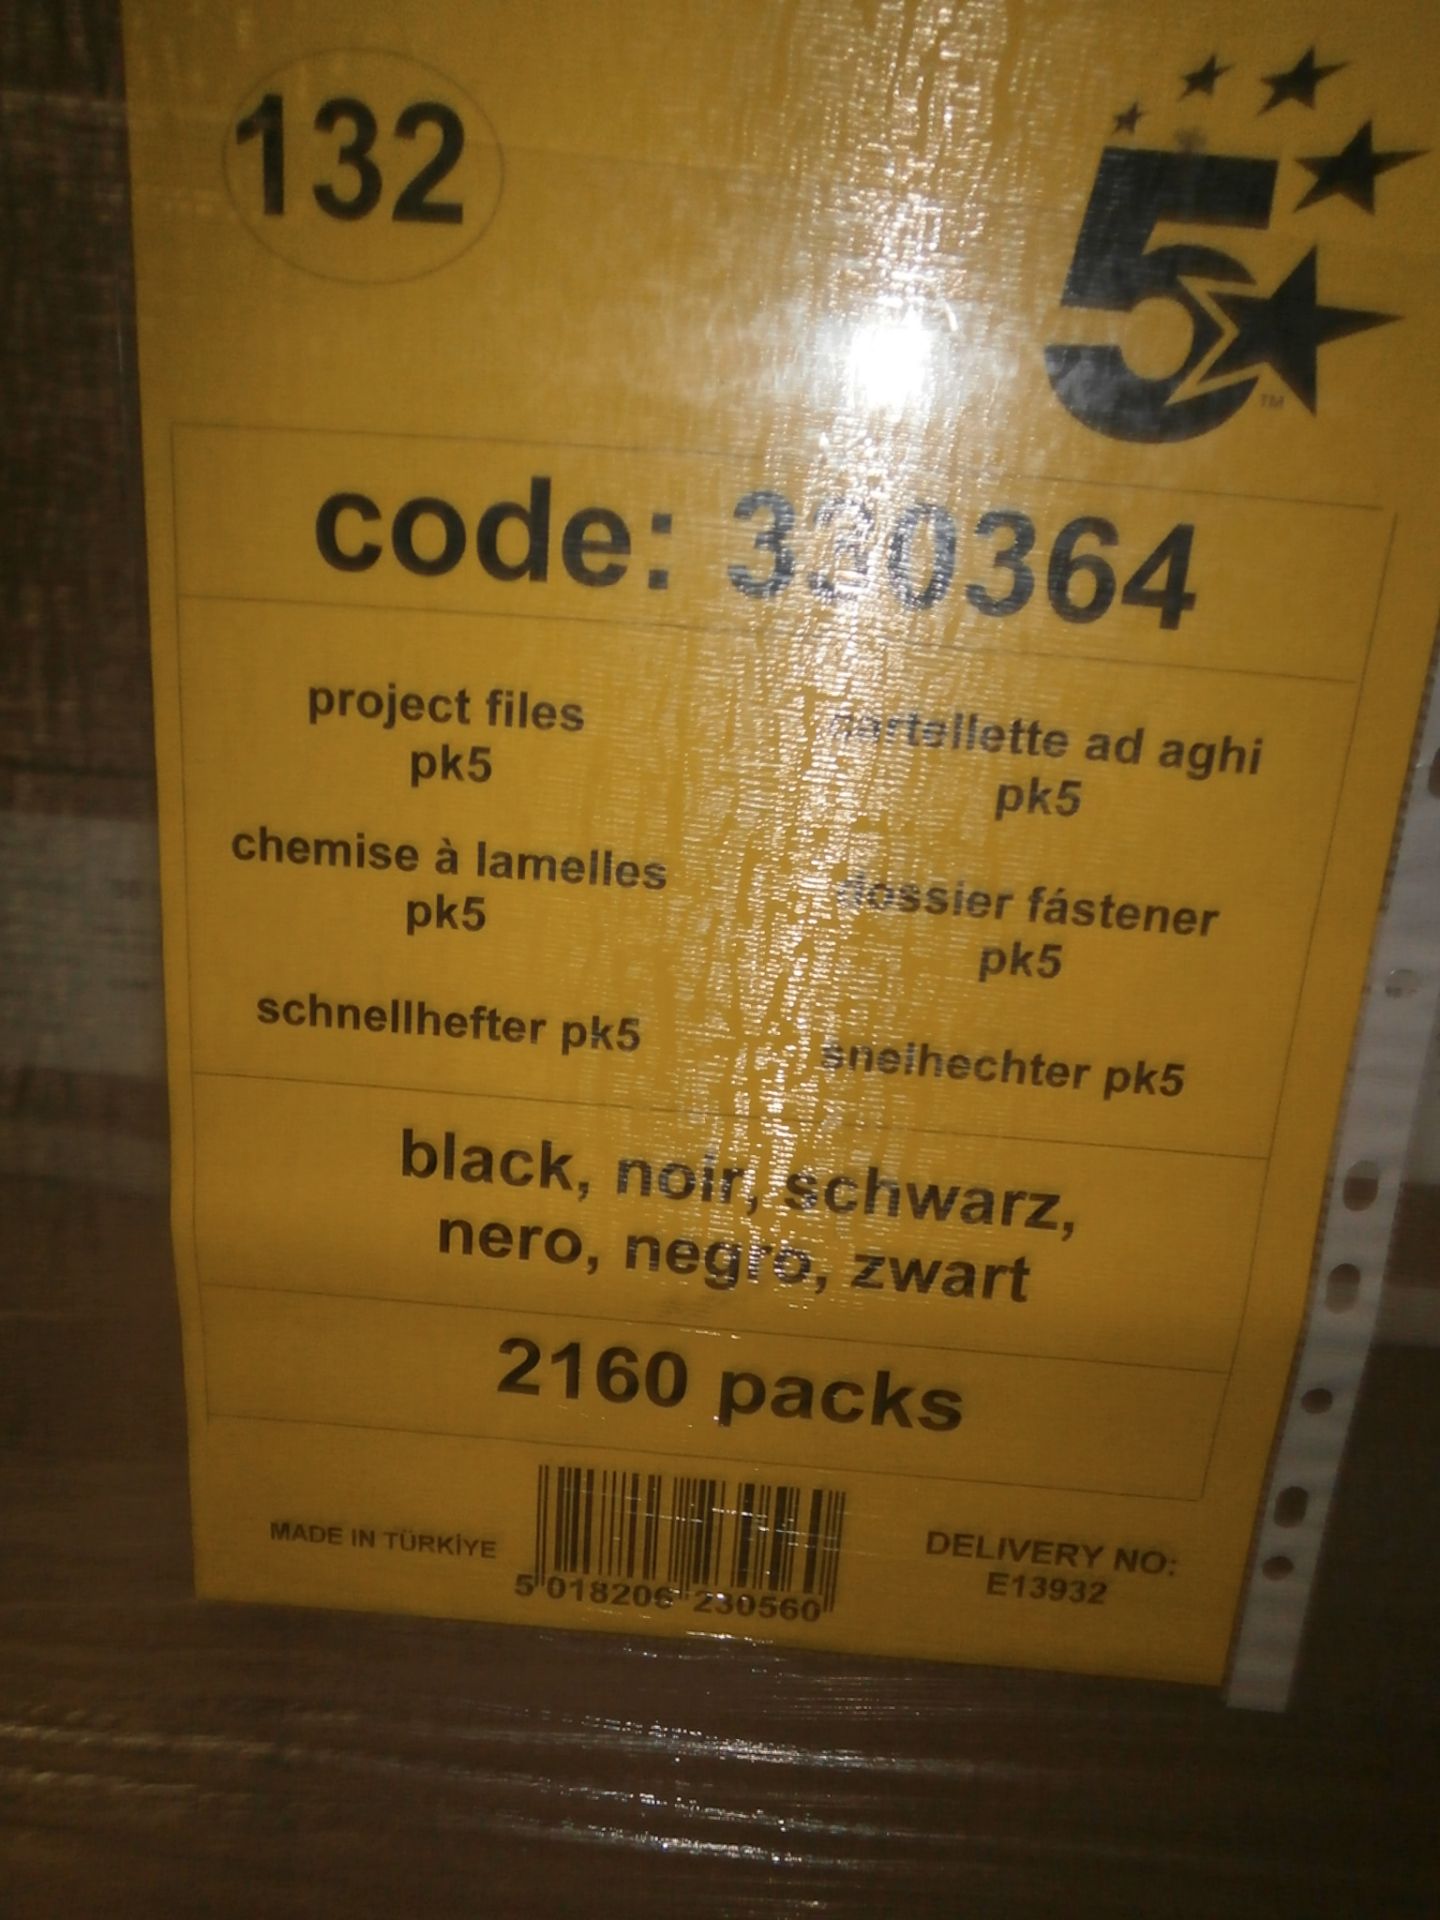 1 x Pallet of 5 Star Project Files Black Product Code 330364 - 2160 Packs of 5 Files in Total ( - Image 2 of 2